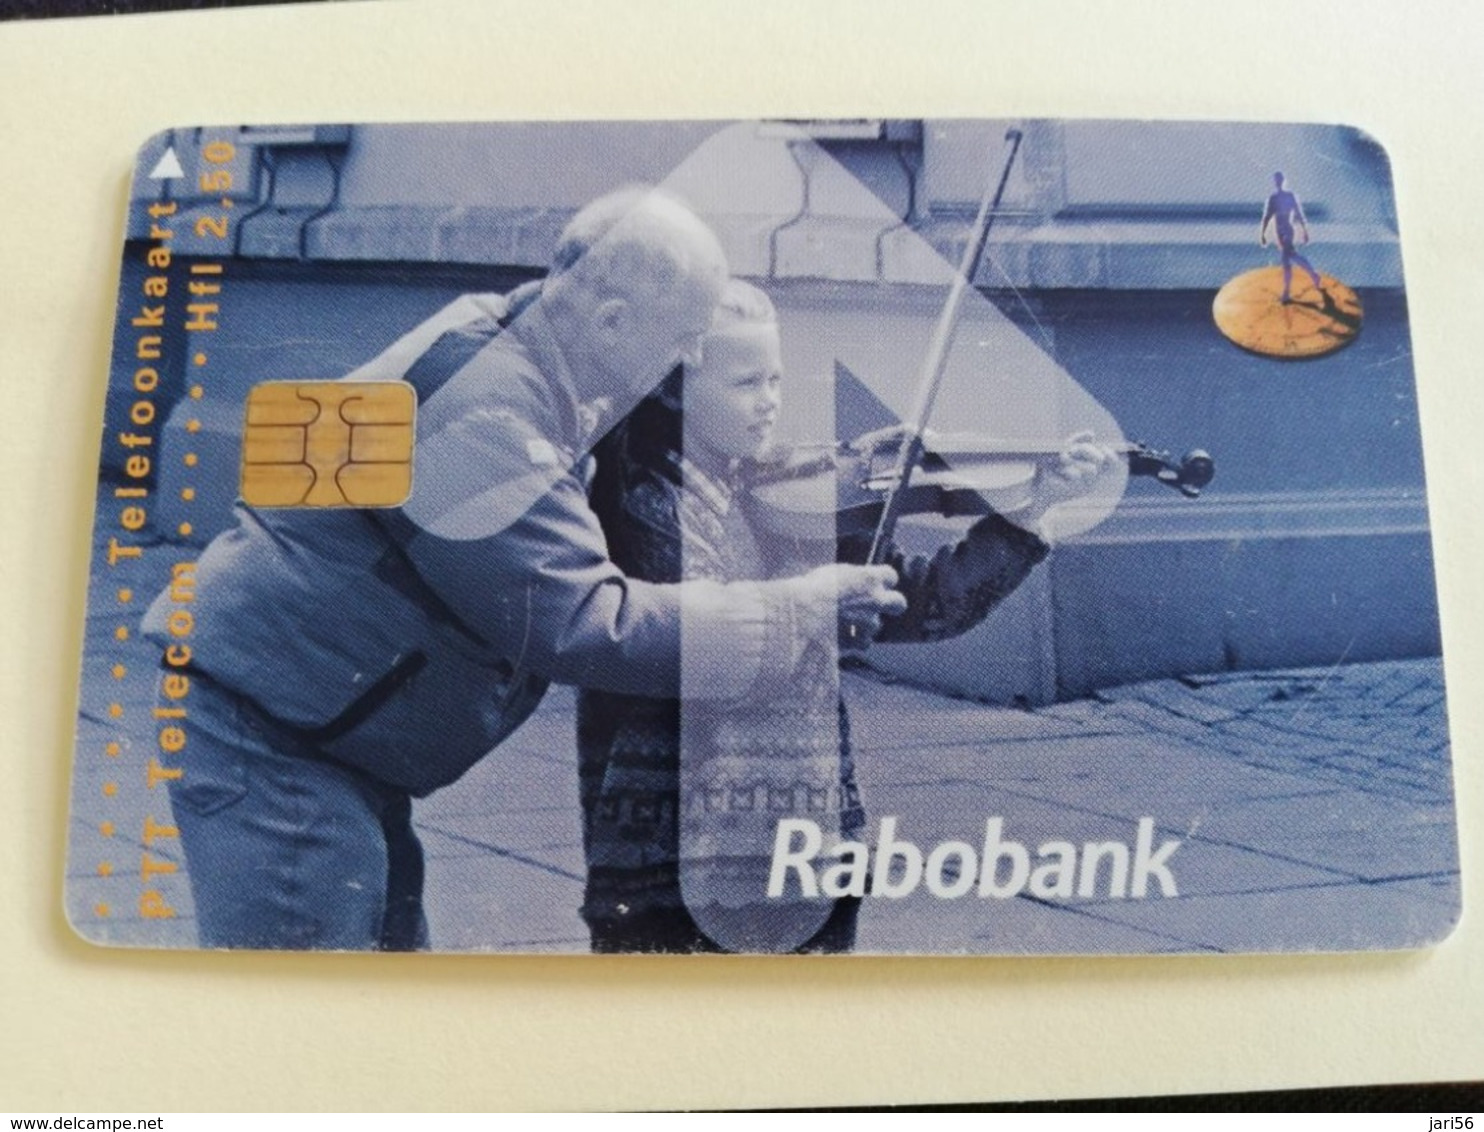 NETHERLANDS  ADVERTISING CHIPCARD HFL 2,50   CRD 378.04   RABOBANK  VIOOL            Fine Used   ** 3214** - Privadas